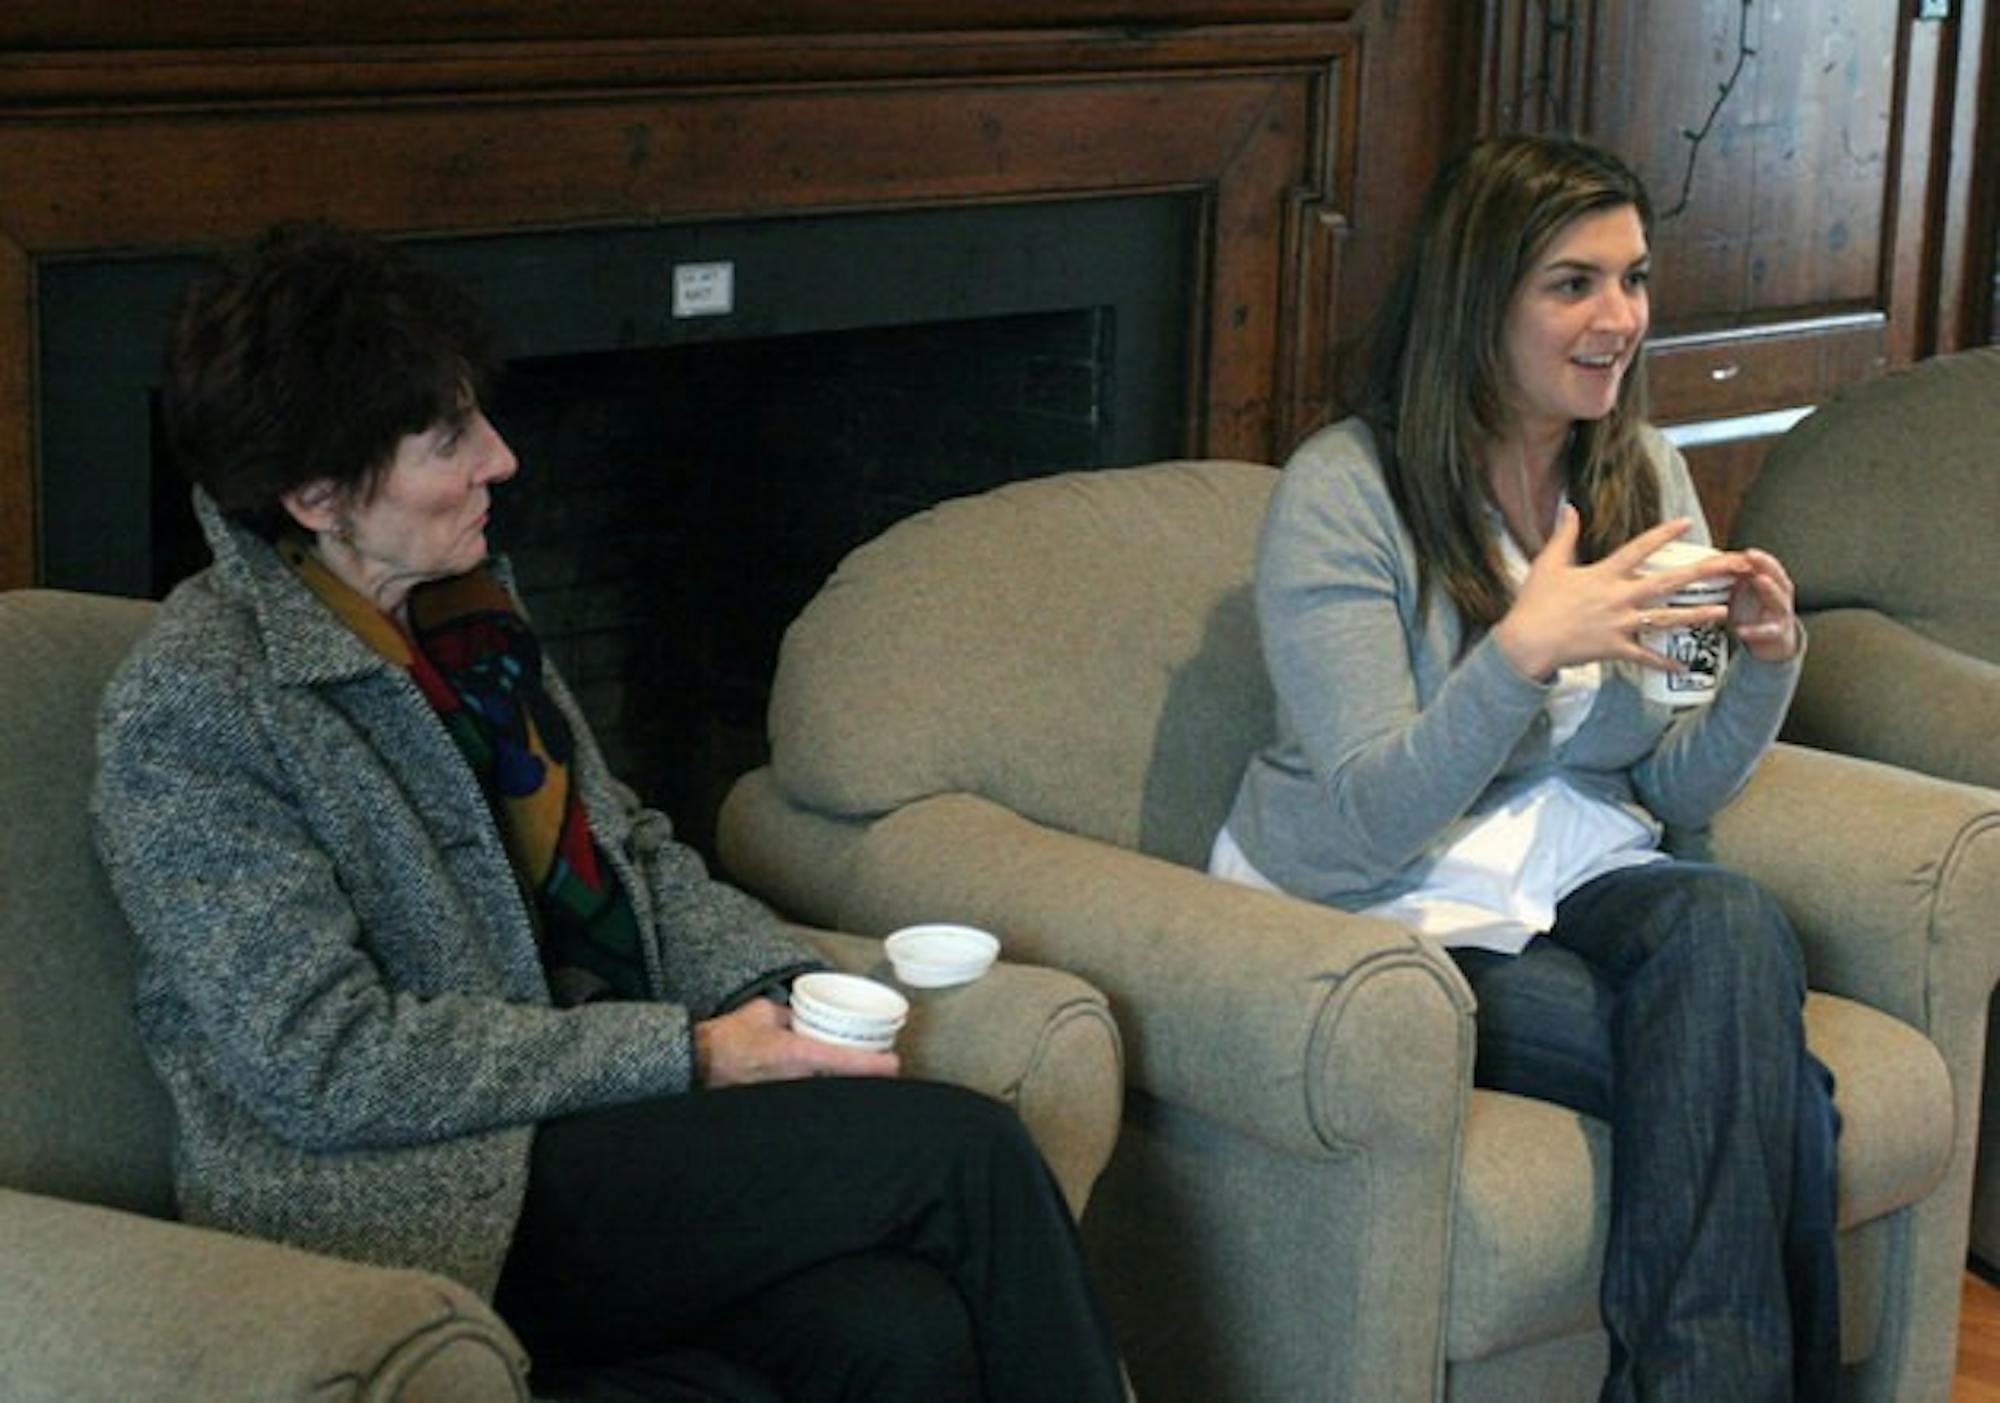 Women's rights advocate Kate Michelman and John Edwards's daughter Cate discussed women's rights, voting and healthcare, among other issues.